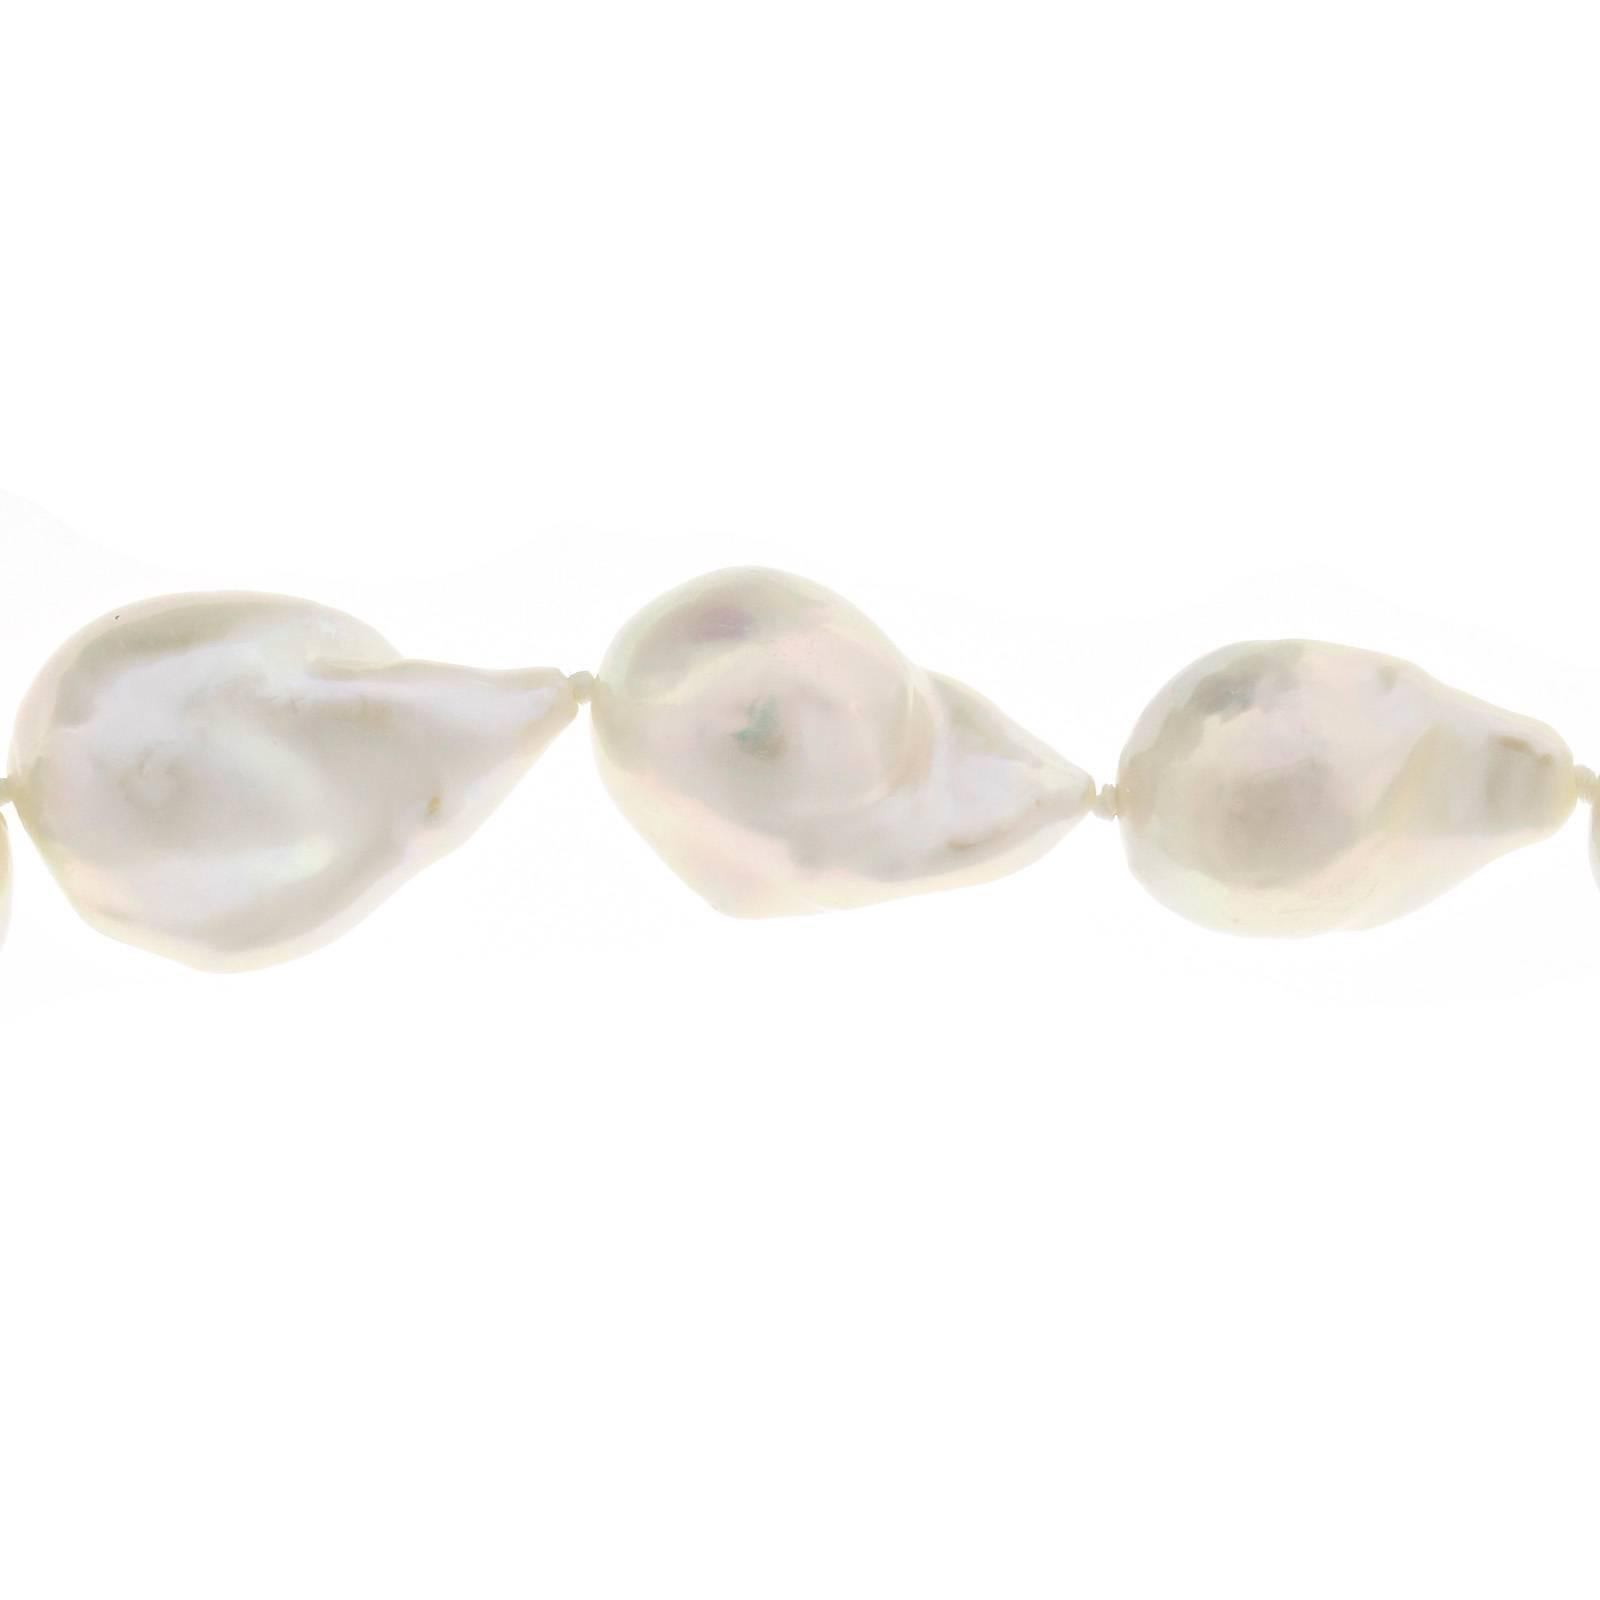 Large size Chinese extra fine white iridescent high lustre baroque cultured pearls strung to a yellow gold 3-D catch. 

19 fine white Chinese freshwater baroque pearls, from 19.96 x 14.66mm to 26.28 x 17.54mm, excellent lustre and iridescent
14k